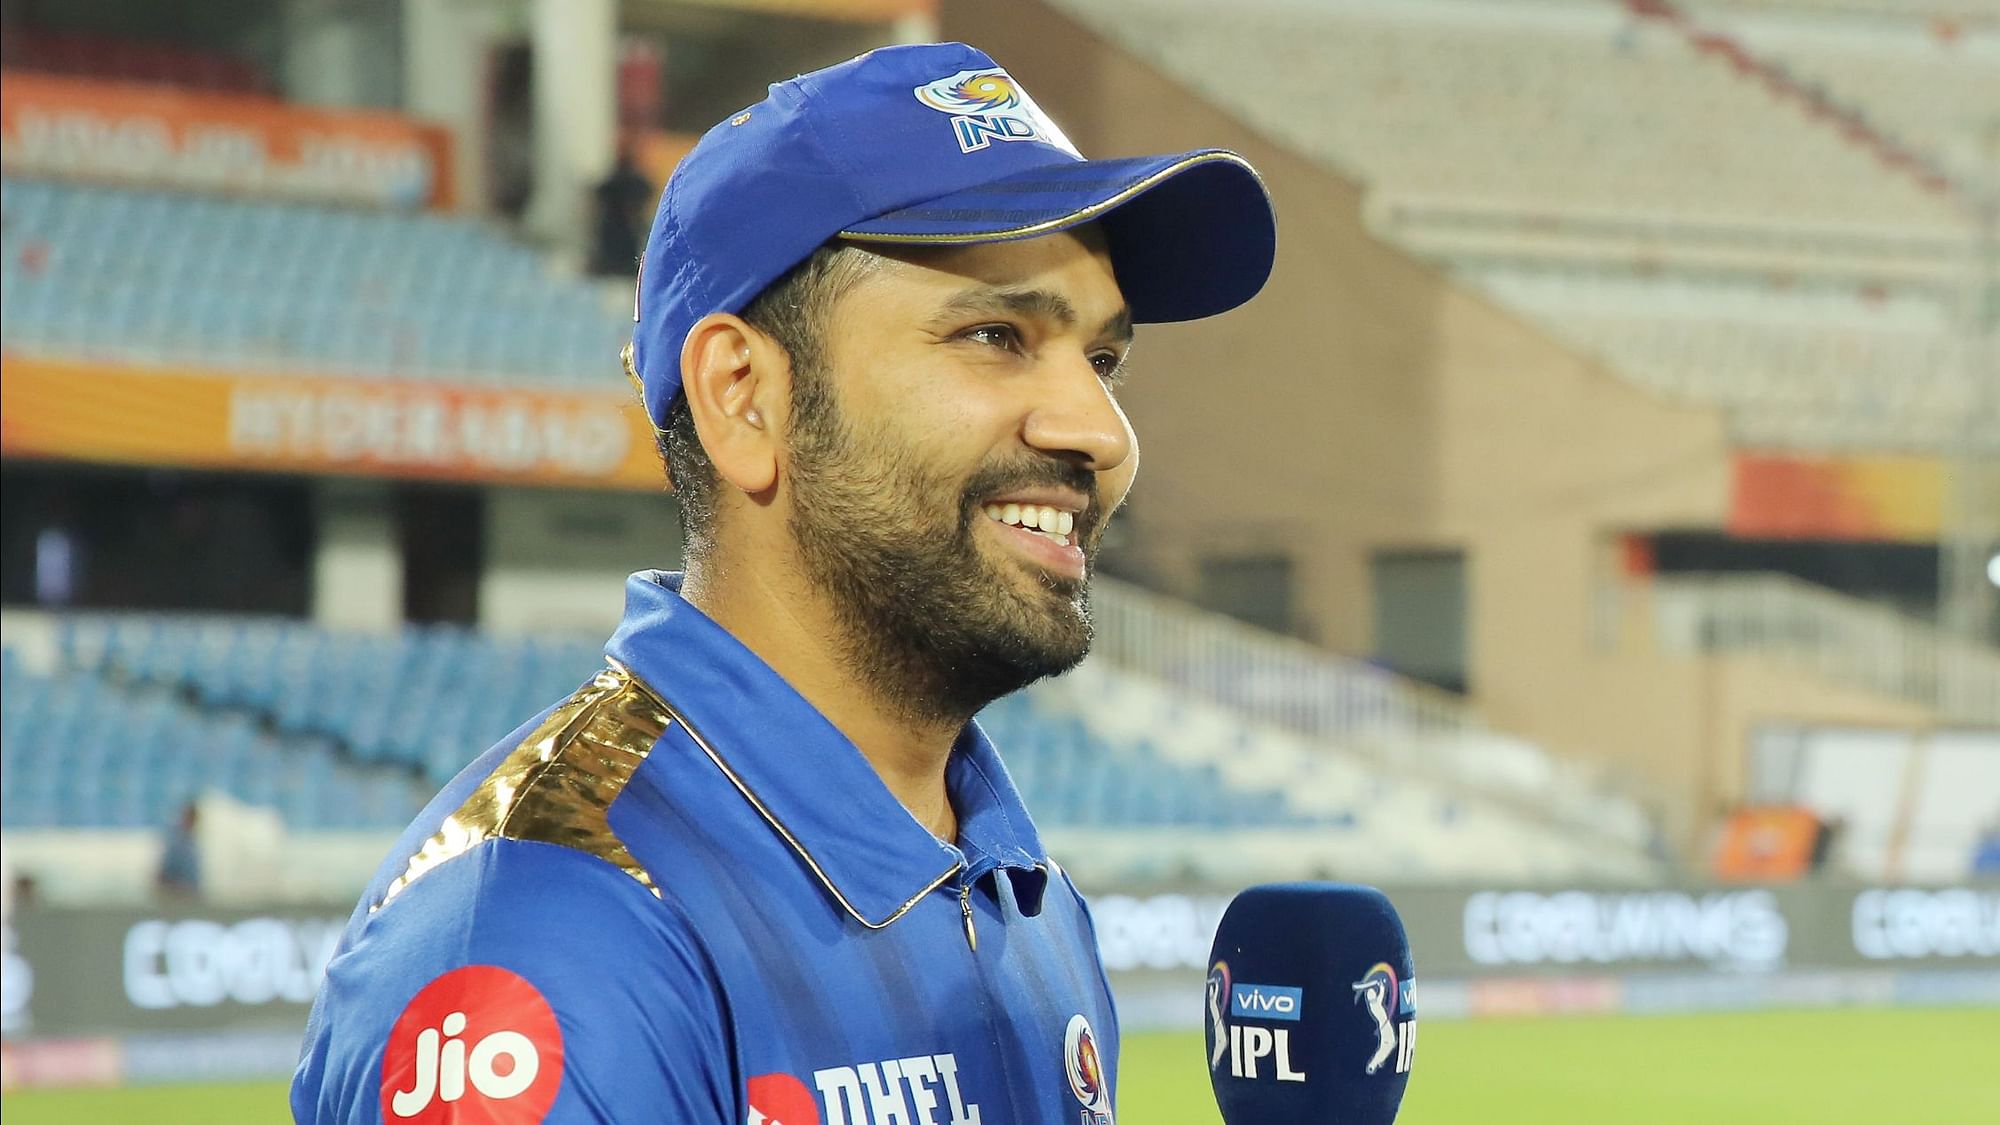 Mumbai Indians captain Rohit credited the bowlers “for restricting a good RCB batting line-up”.